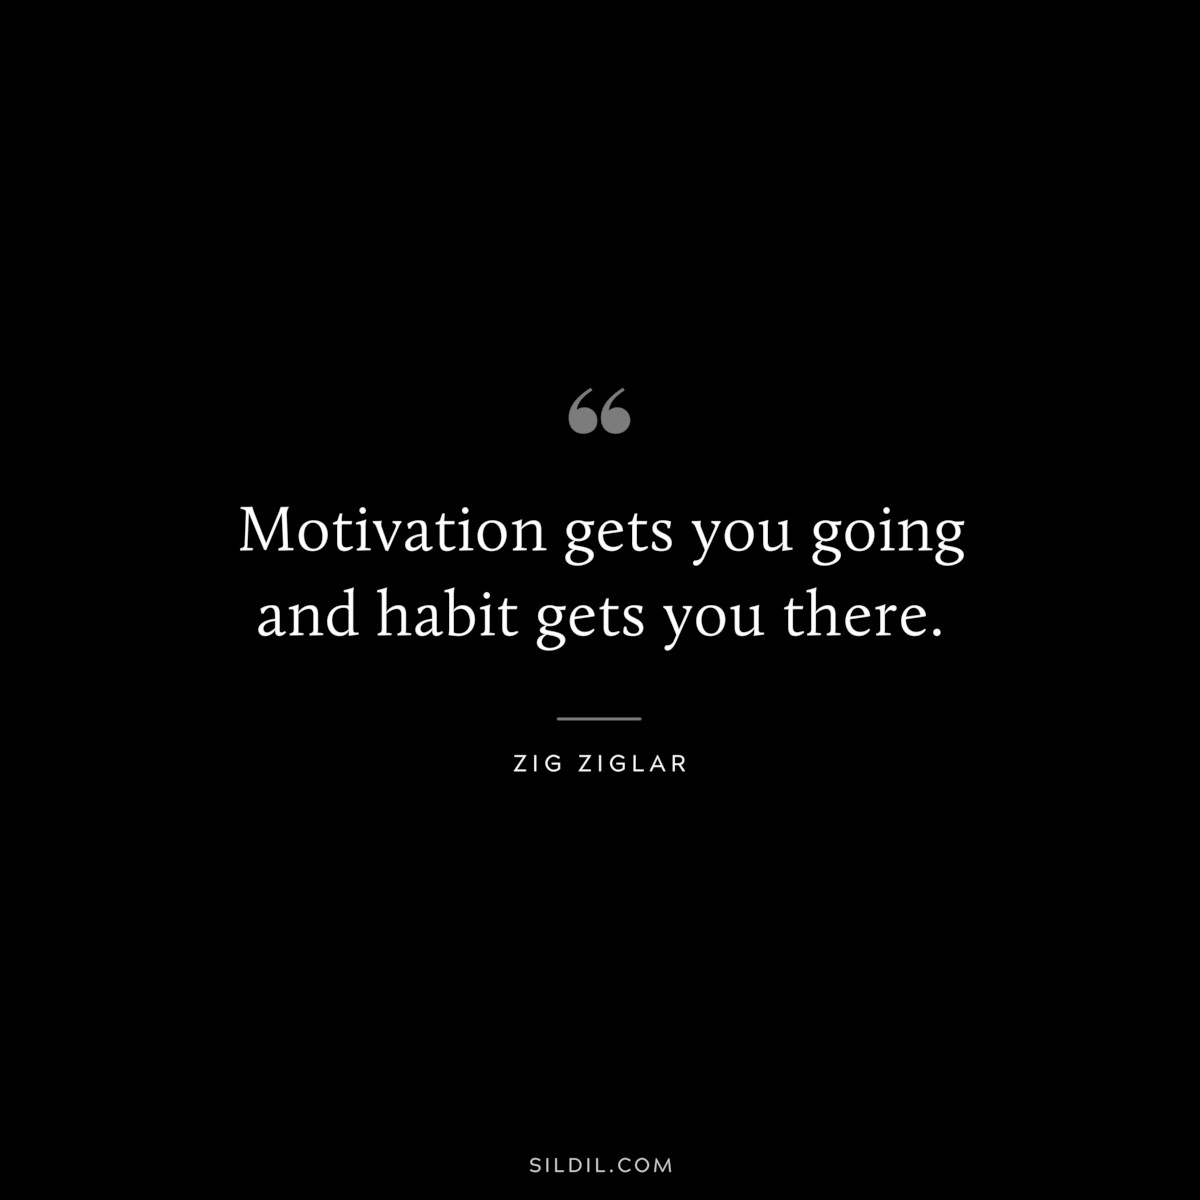 Motivation gets you going and habit gets you there. ― Zig Ziglar